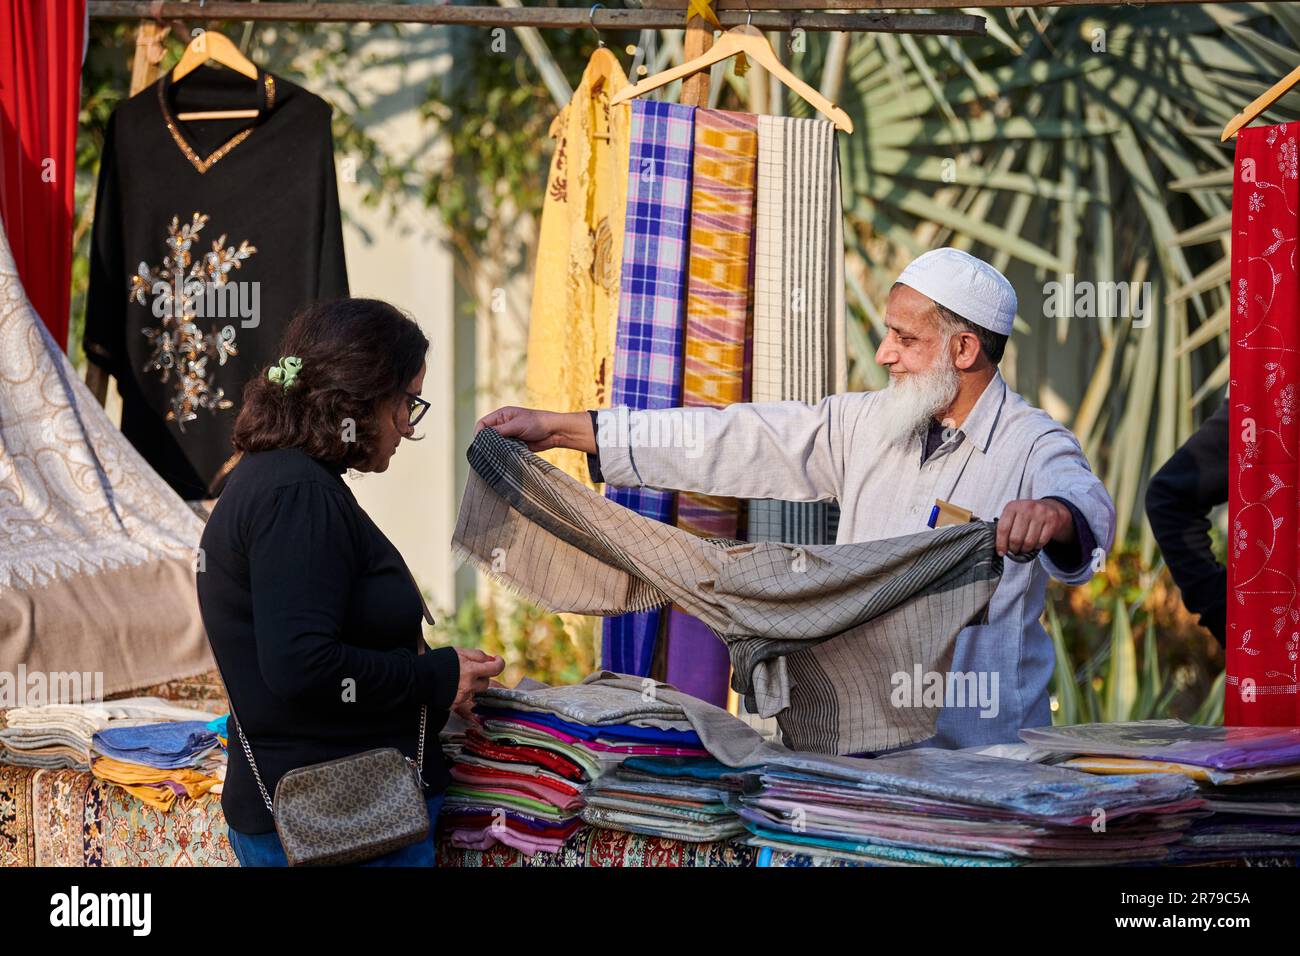 New Delhi, India - 10.12.2022 - Old seller of textile and carpet shows goods to woman at outdoor fair, bearded muslim salesman in taqiyah cap shows ex Stock Photo